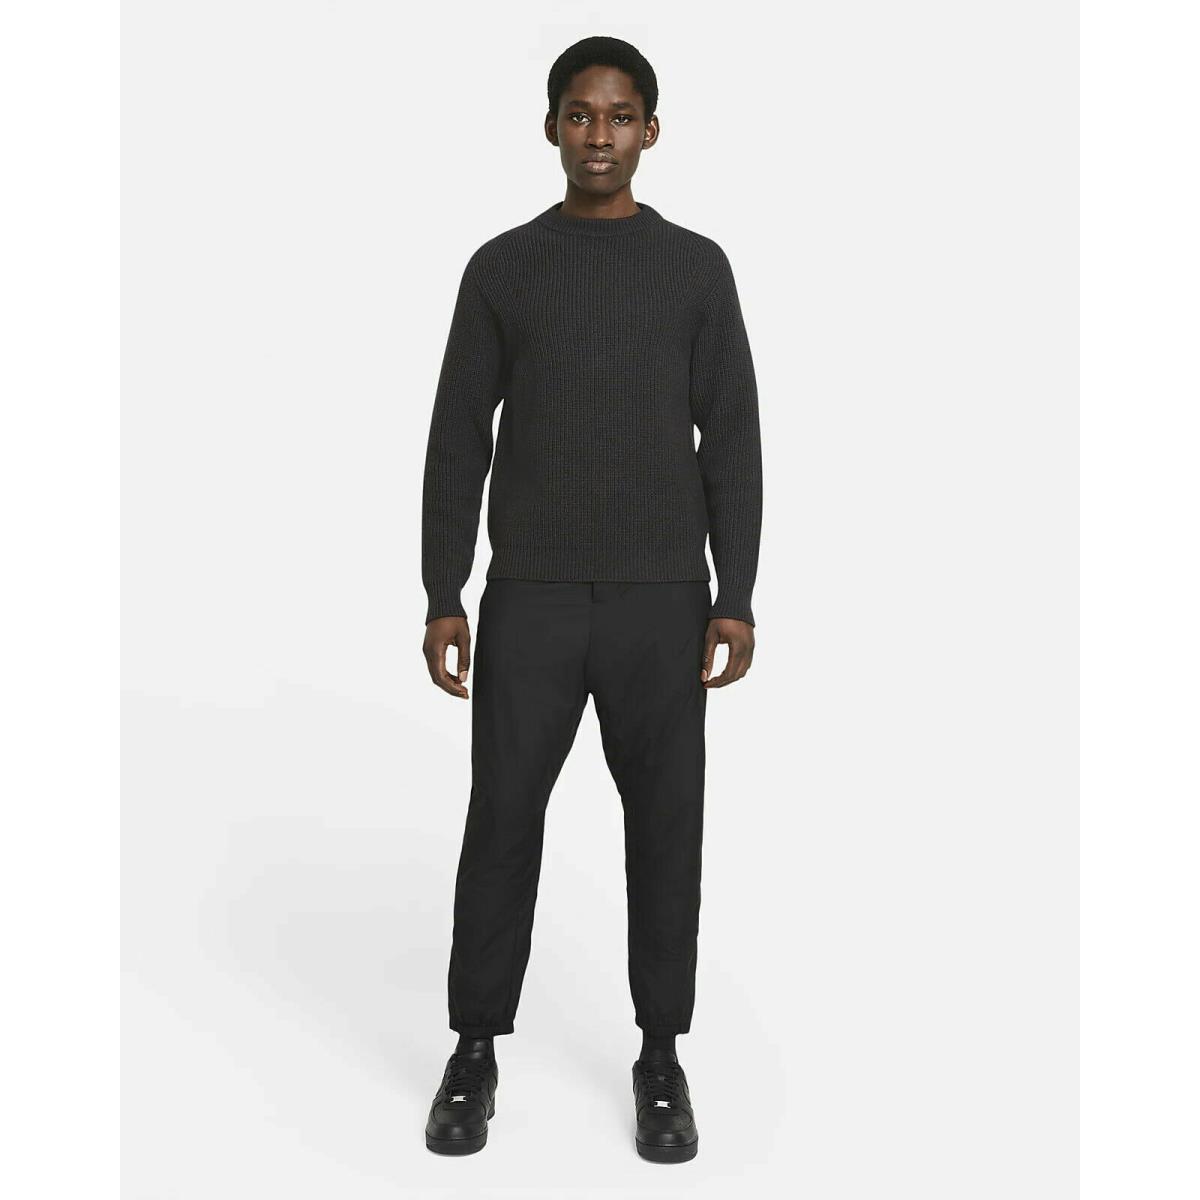 Nike clothing Every Stitch Considered Pants - Black 1